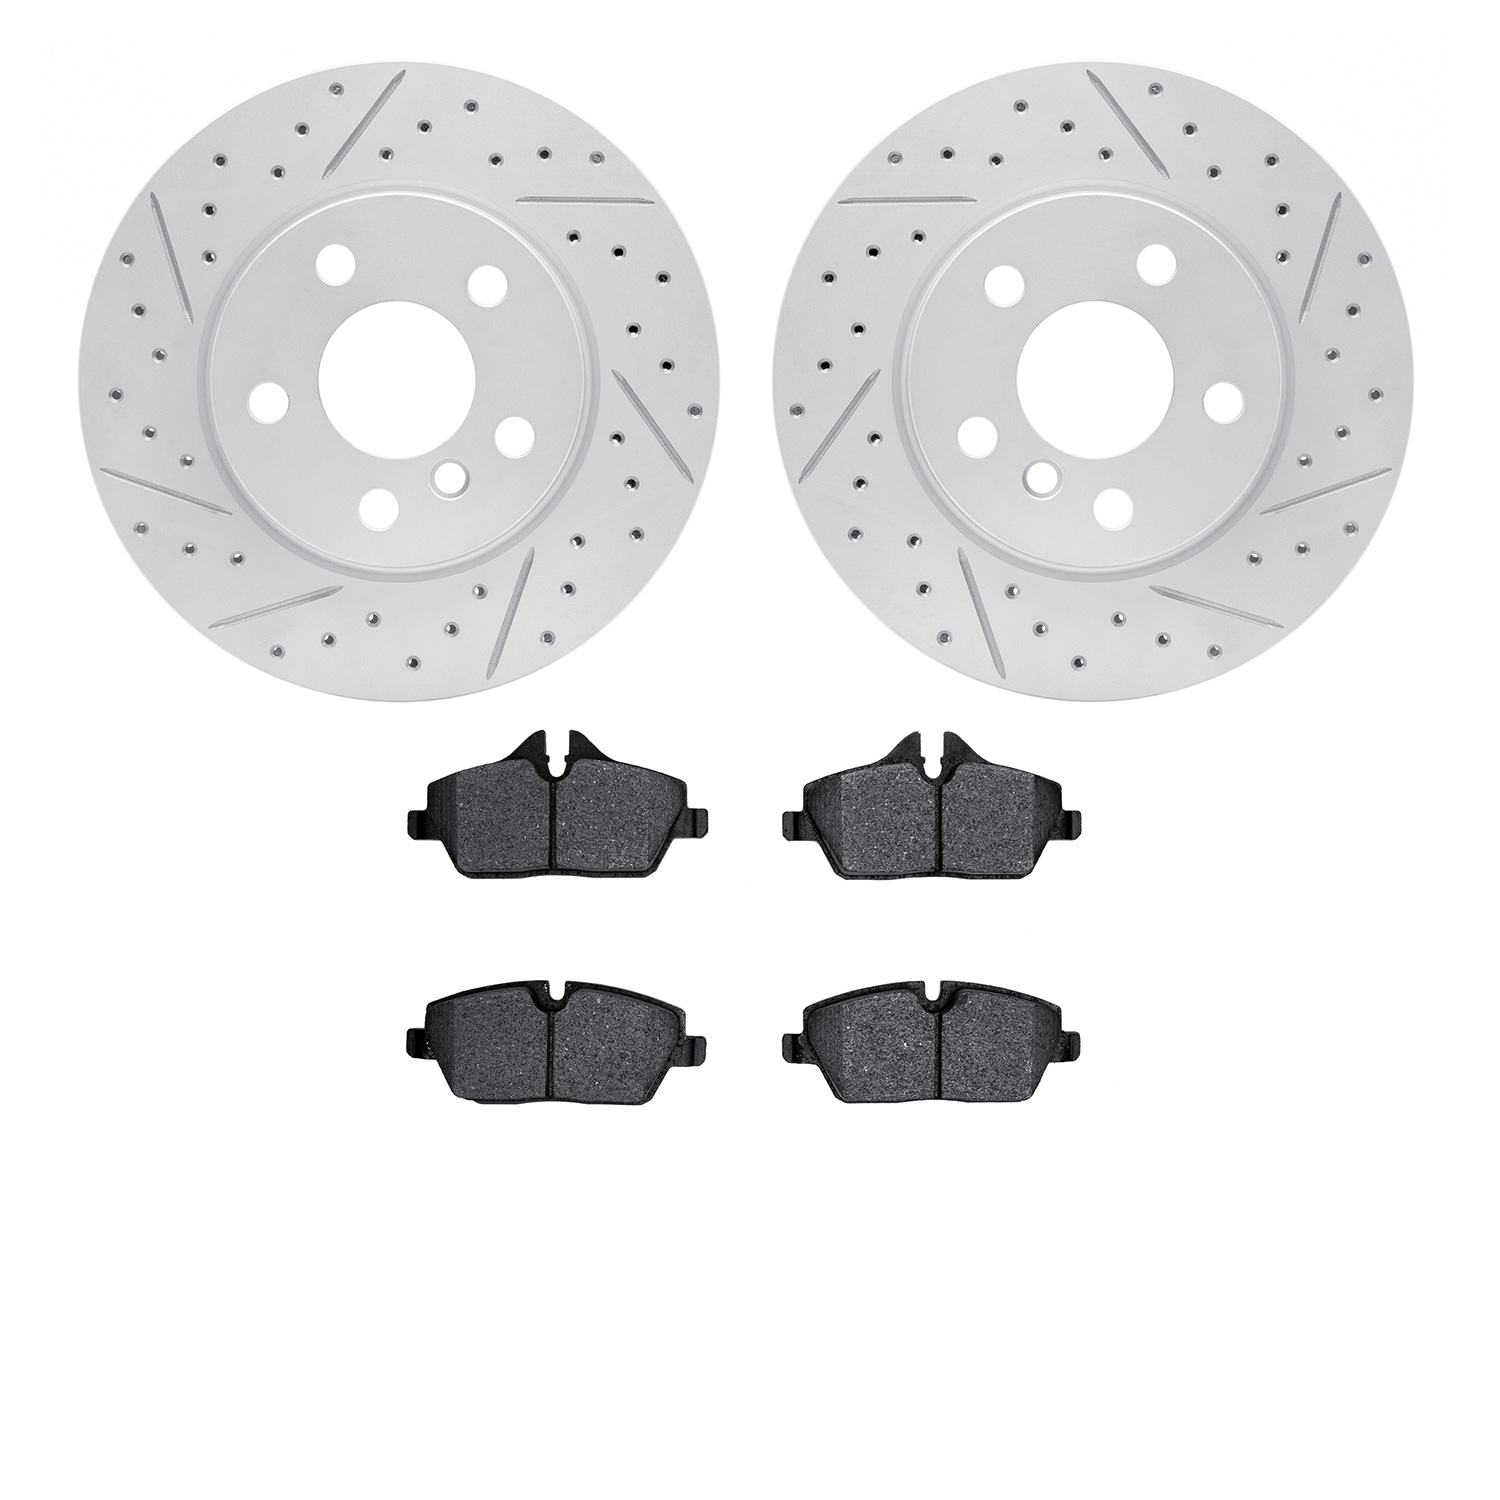 2502-32028 Geoperformance Drilled/Slotted Rotors w/5000 Advanced Brake Pads Kit, Fits Select Mini, Position: Front